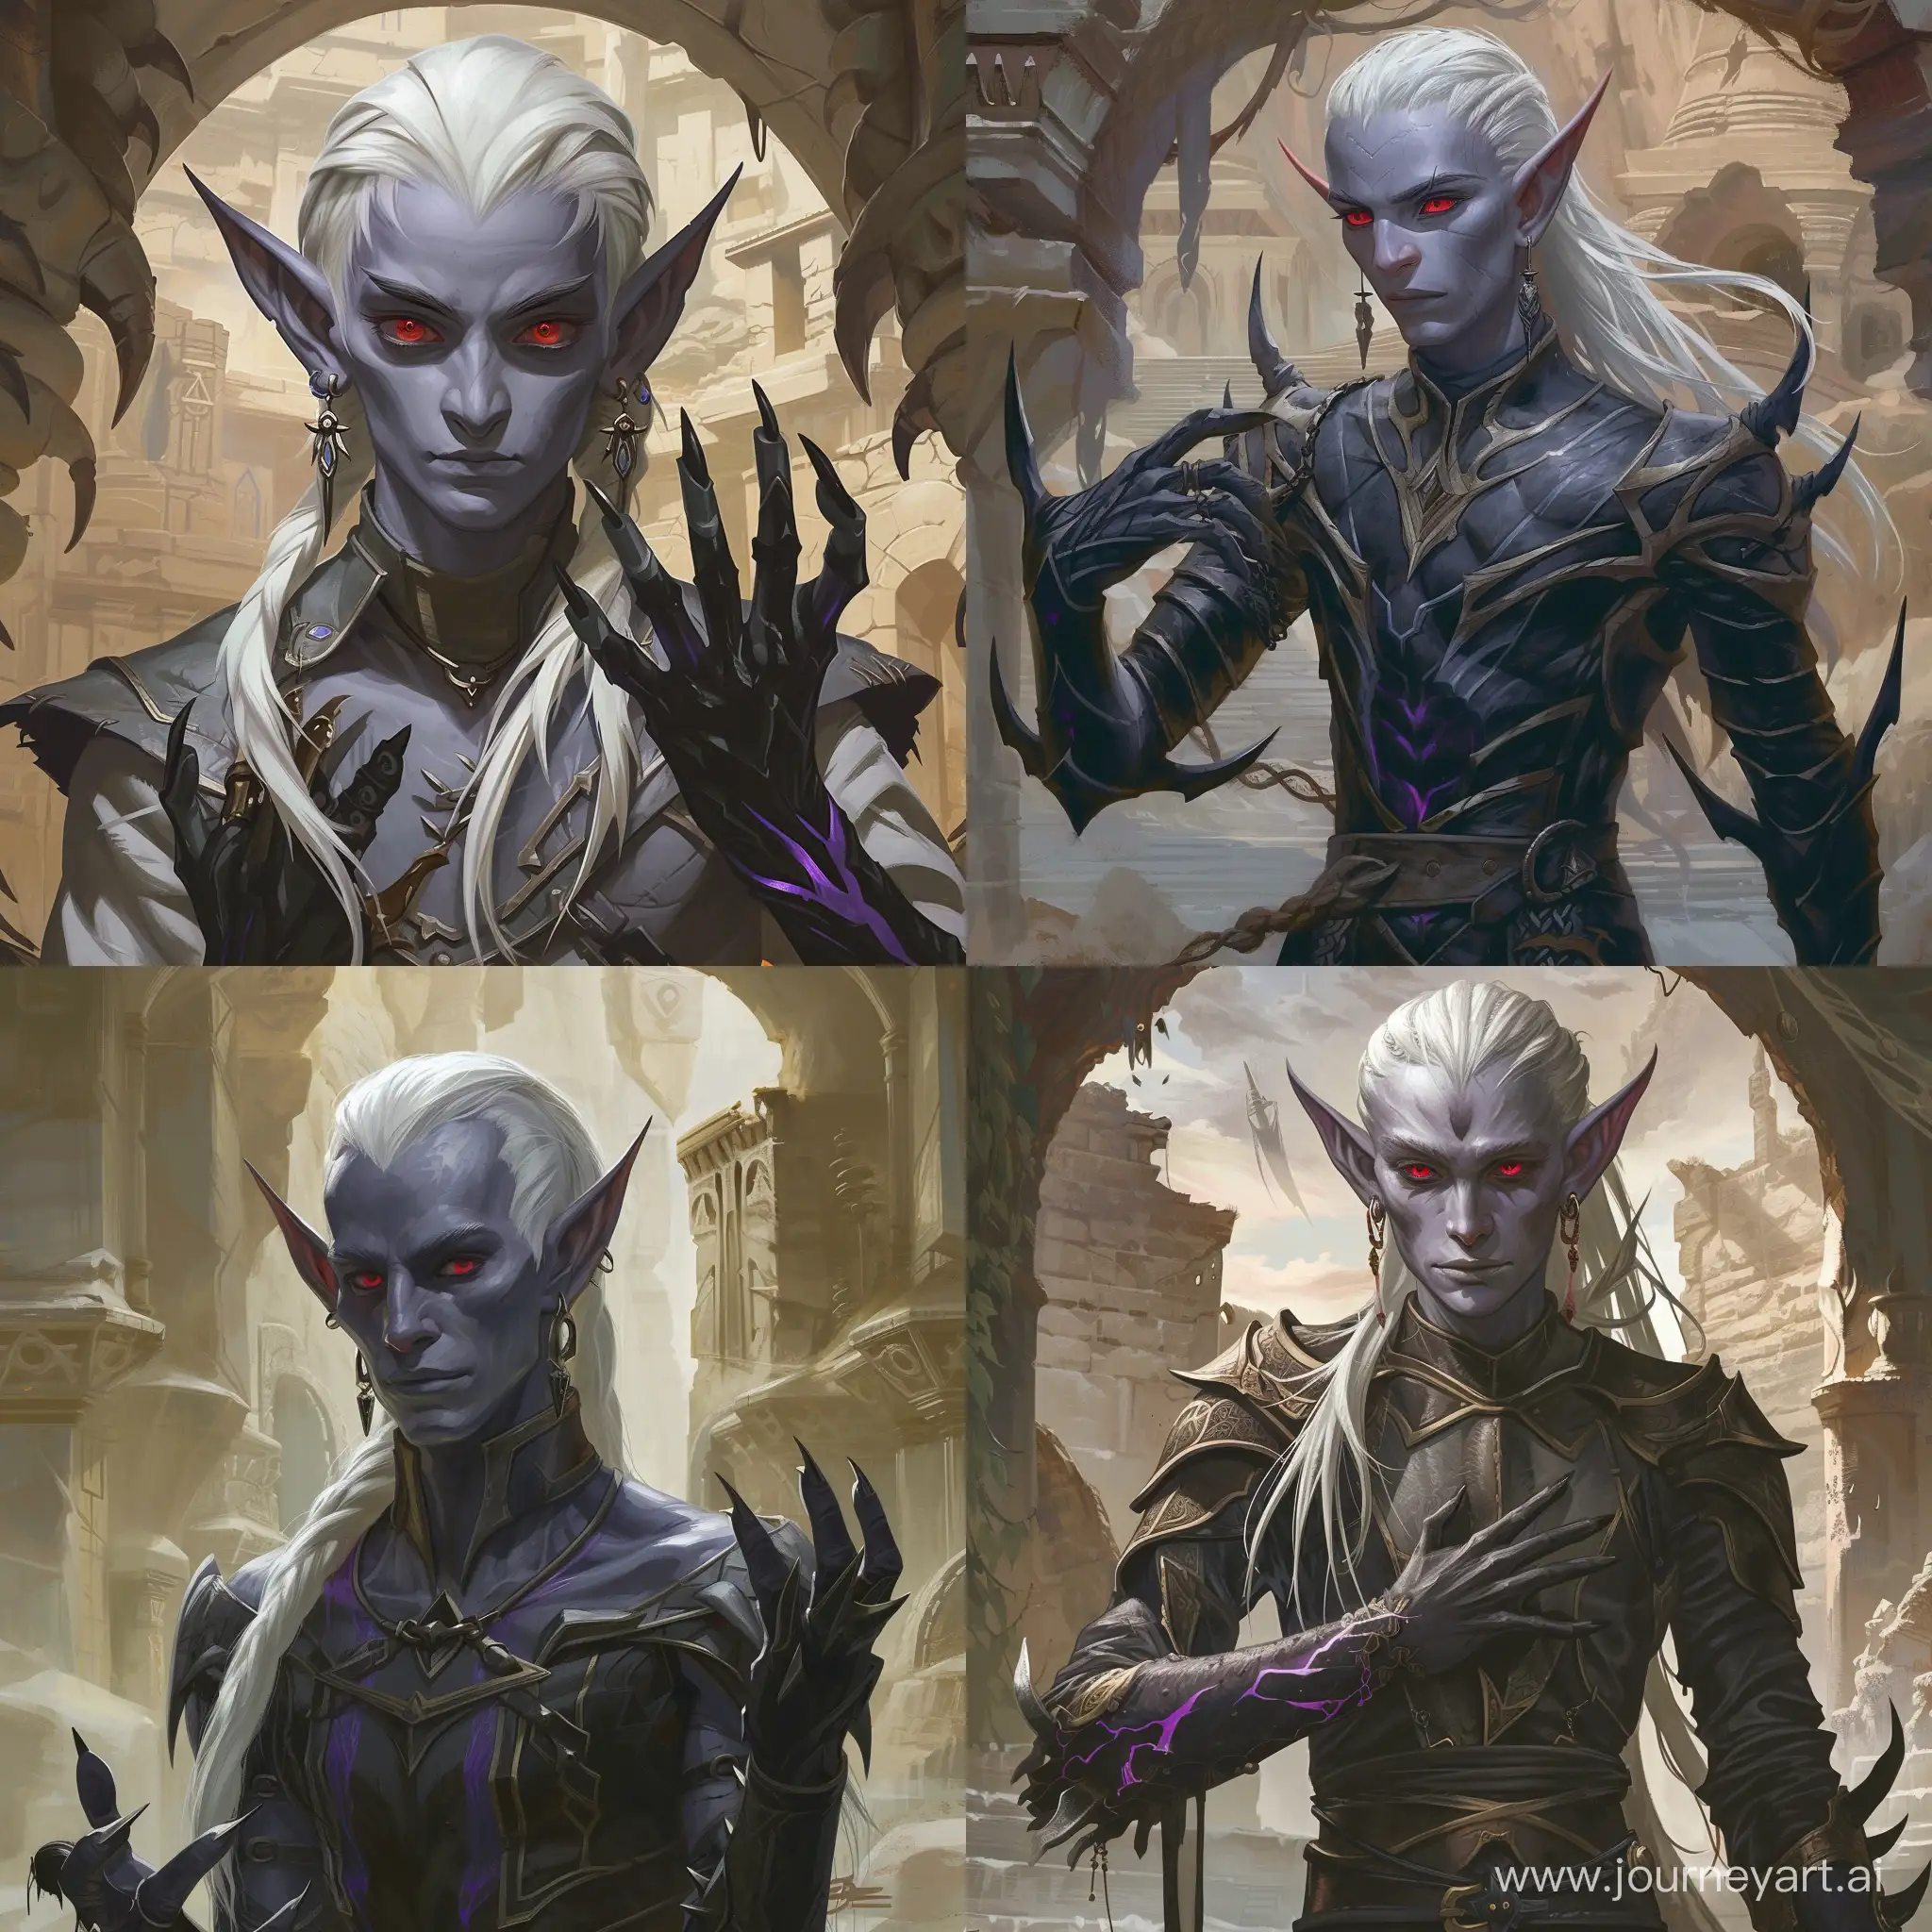 Dark-Elf-Rogue-in-Ruined-Temple-Fantasy-Dungeons-and-Dragons-Art